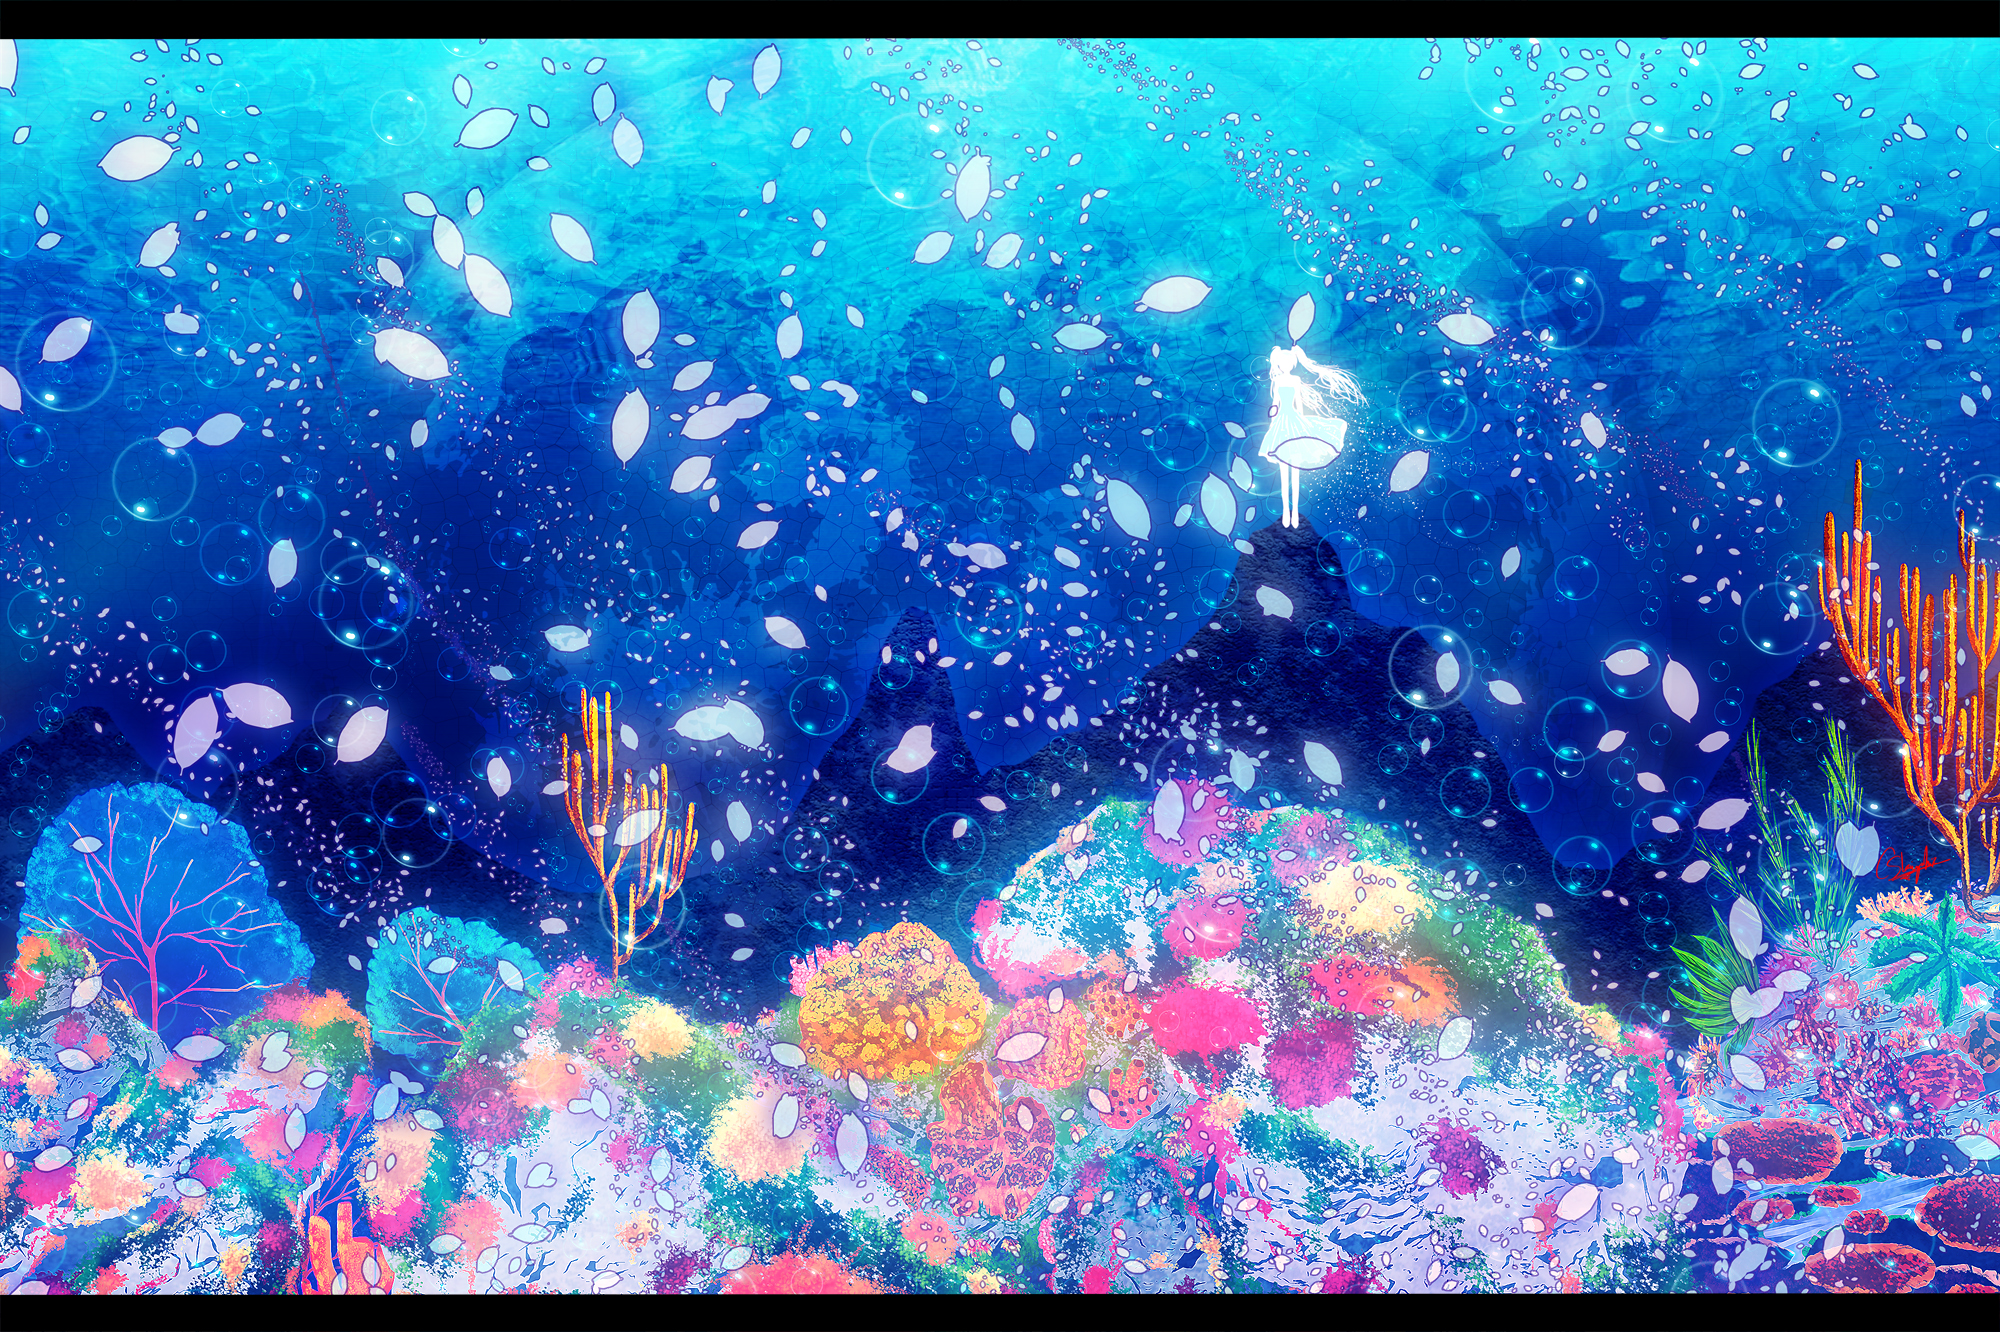 anime girl in blond long hair, underwater, corals, bubbles, happy - SeaArt  AI